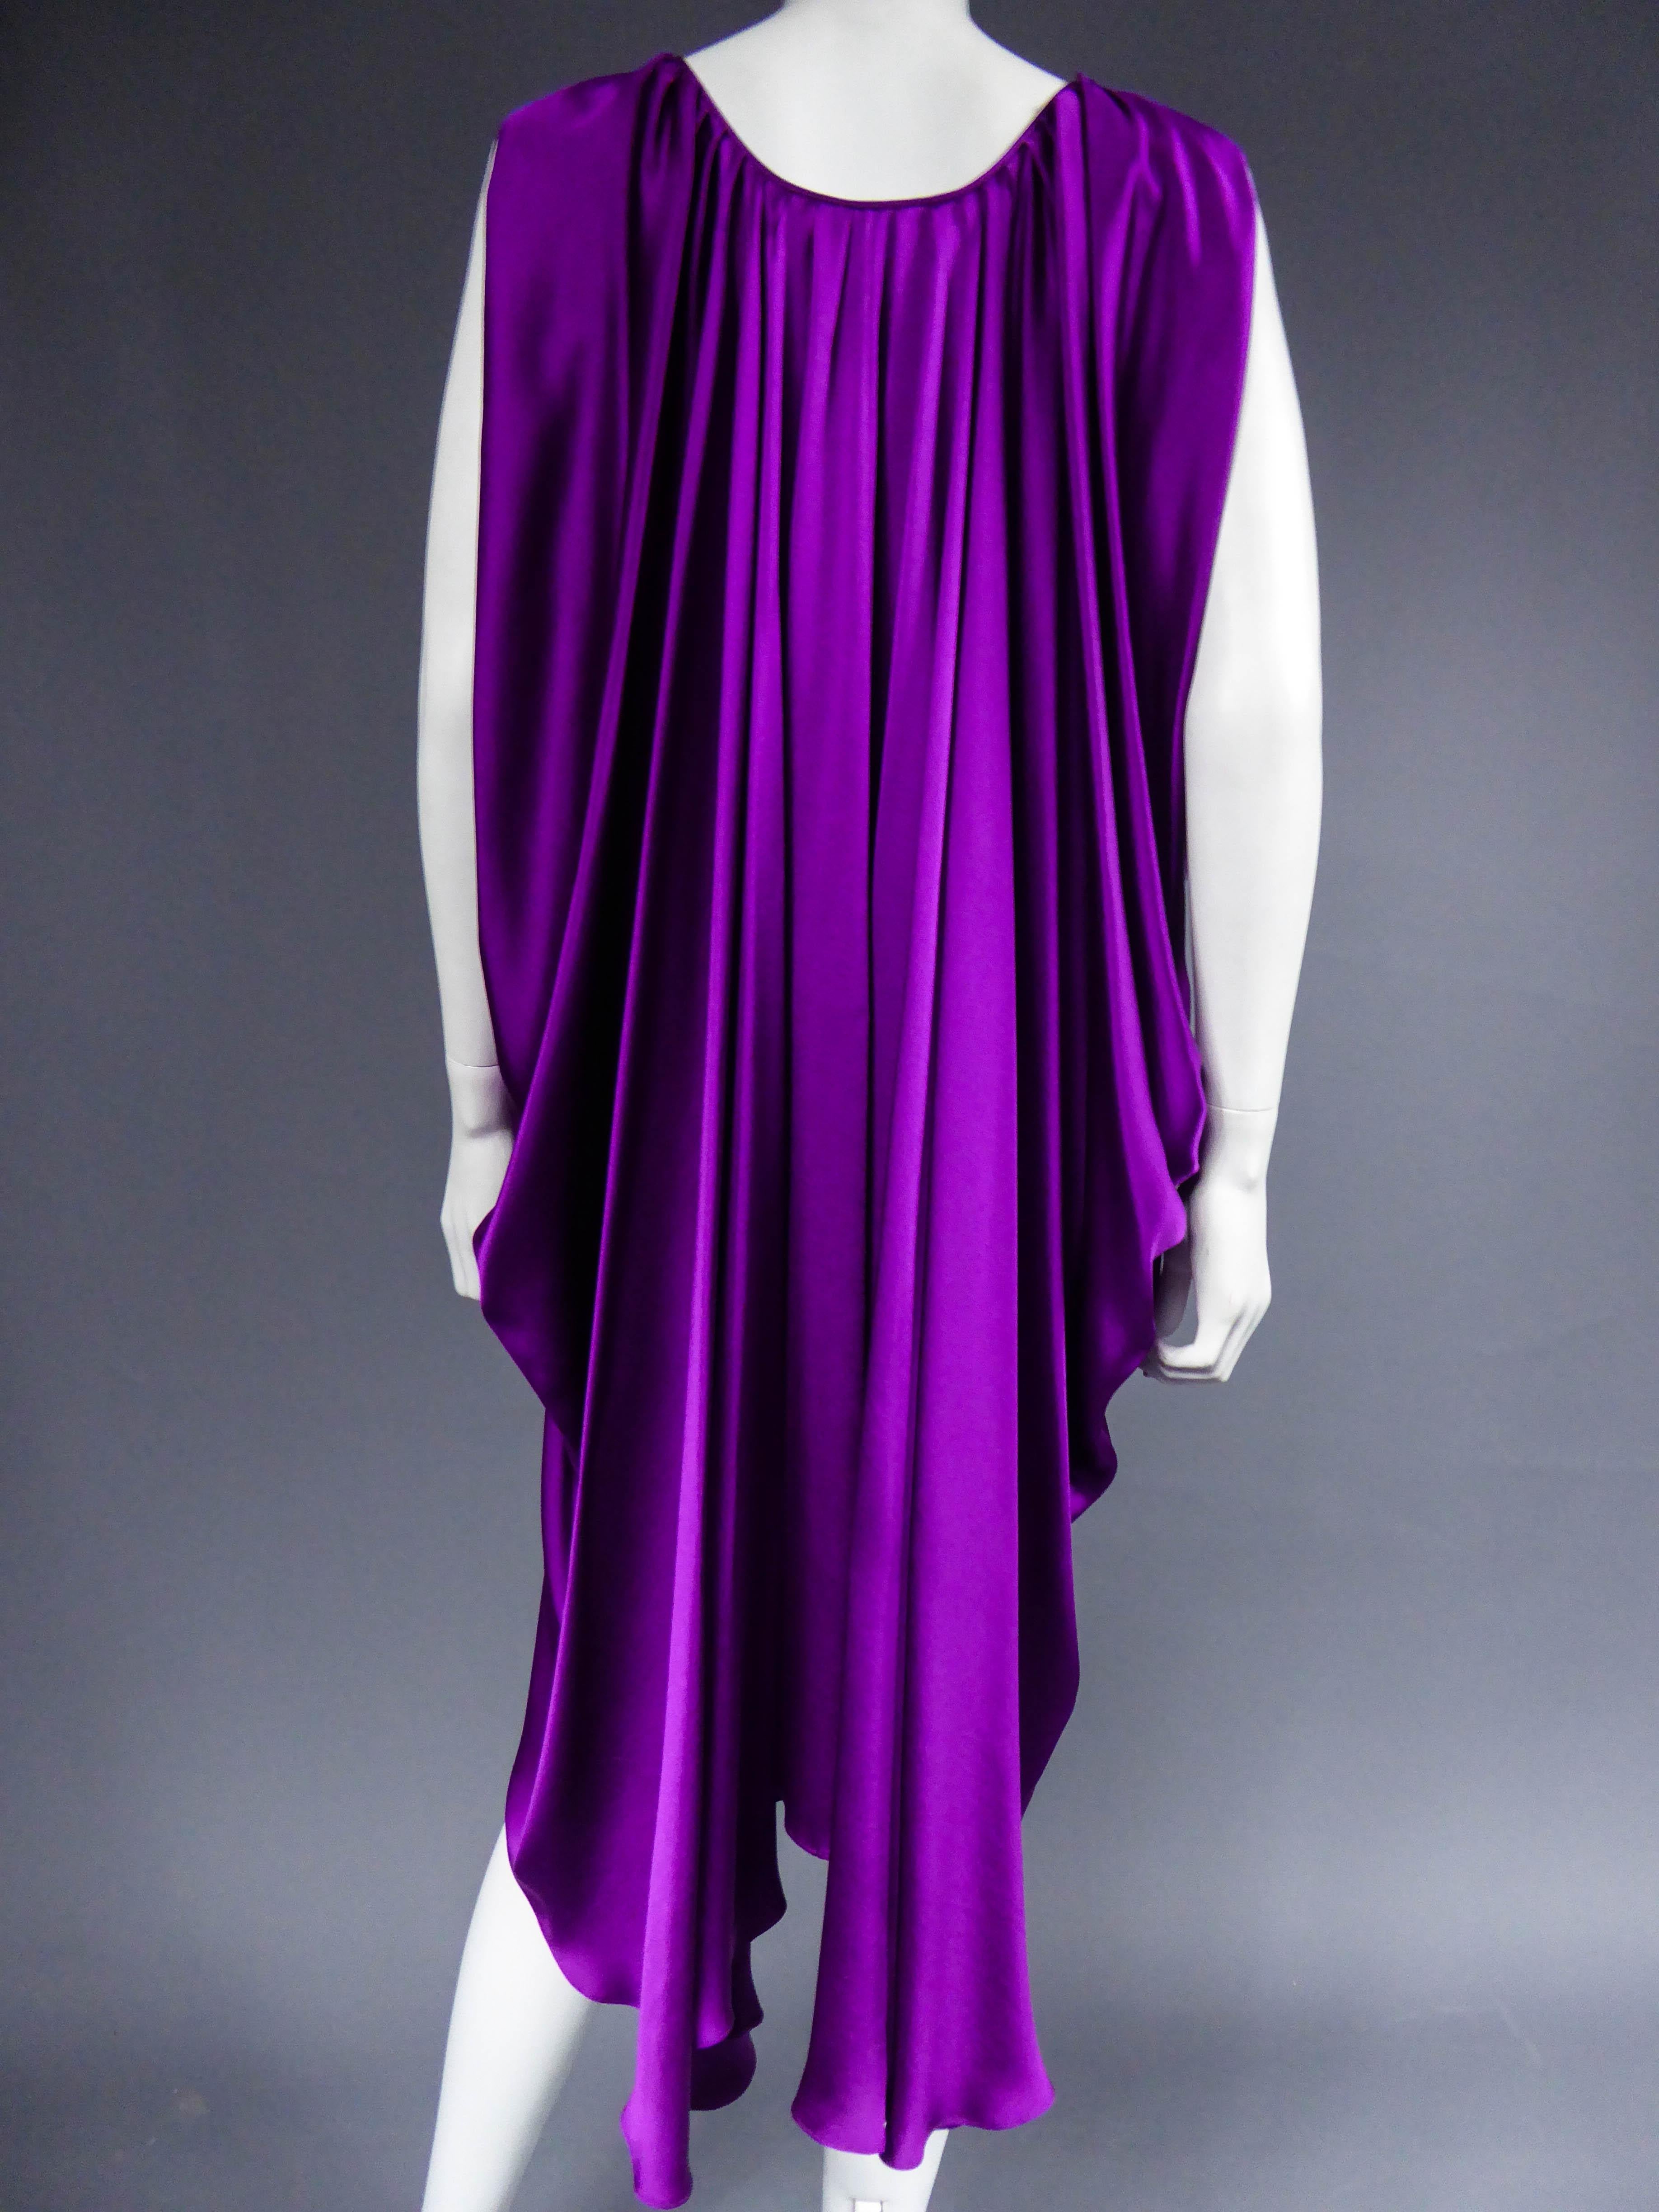 Yves Saint Laurent Satin Dress by Stefano Pilati, 2008 Collection  For Sale 1